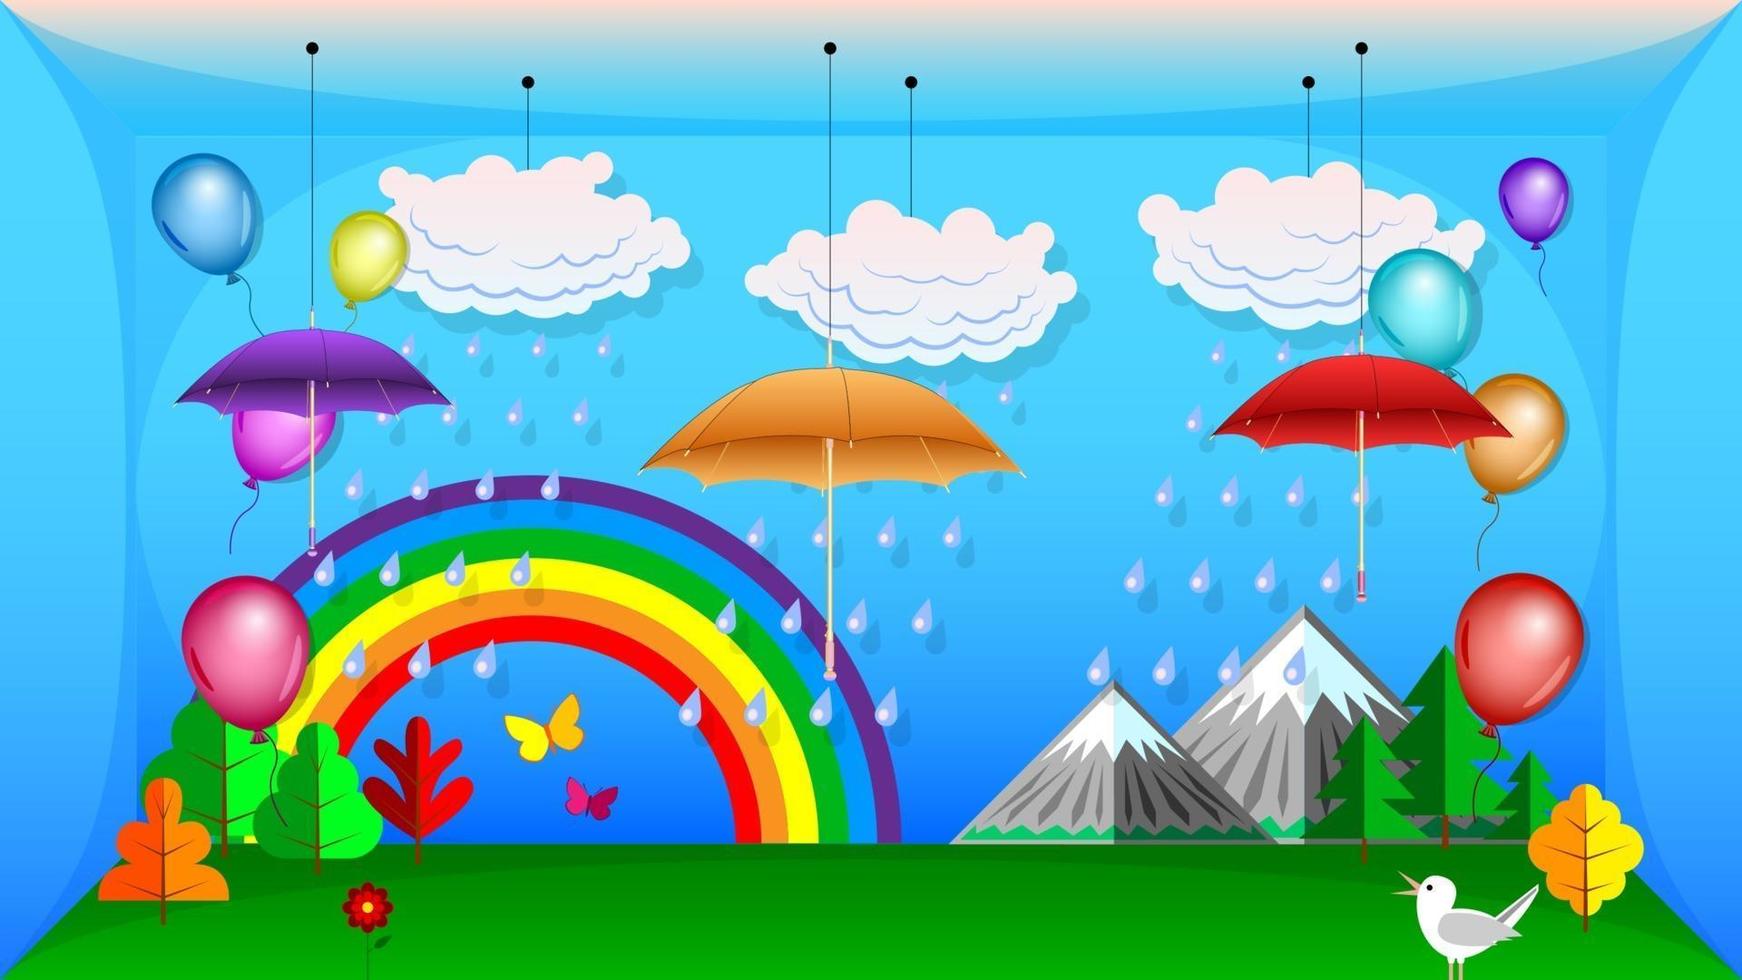 Decorations for the childrens room, kids zone vector